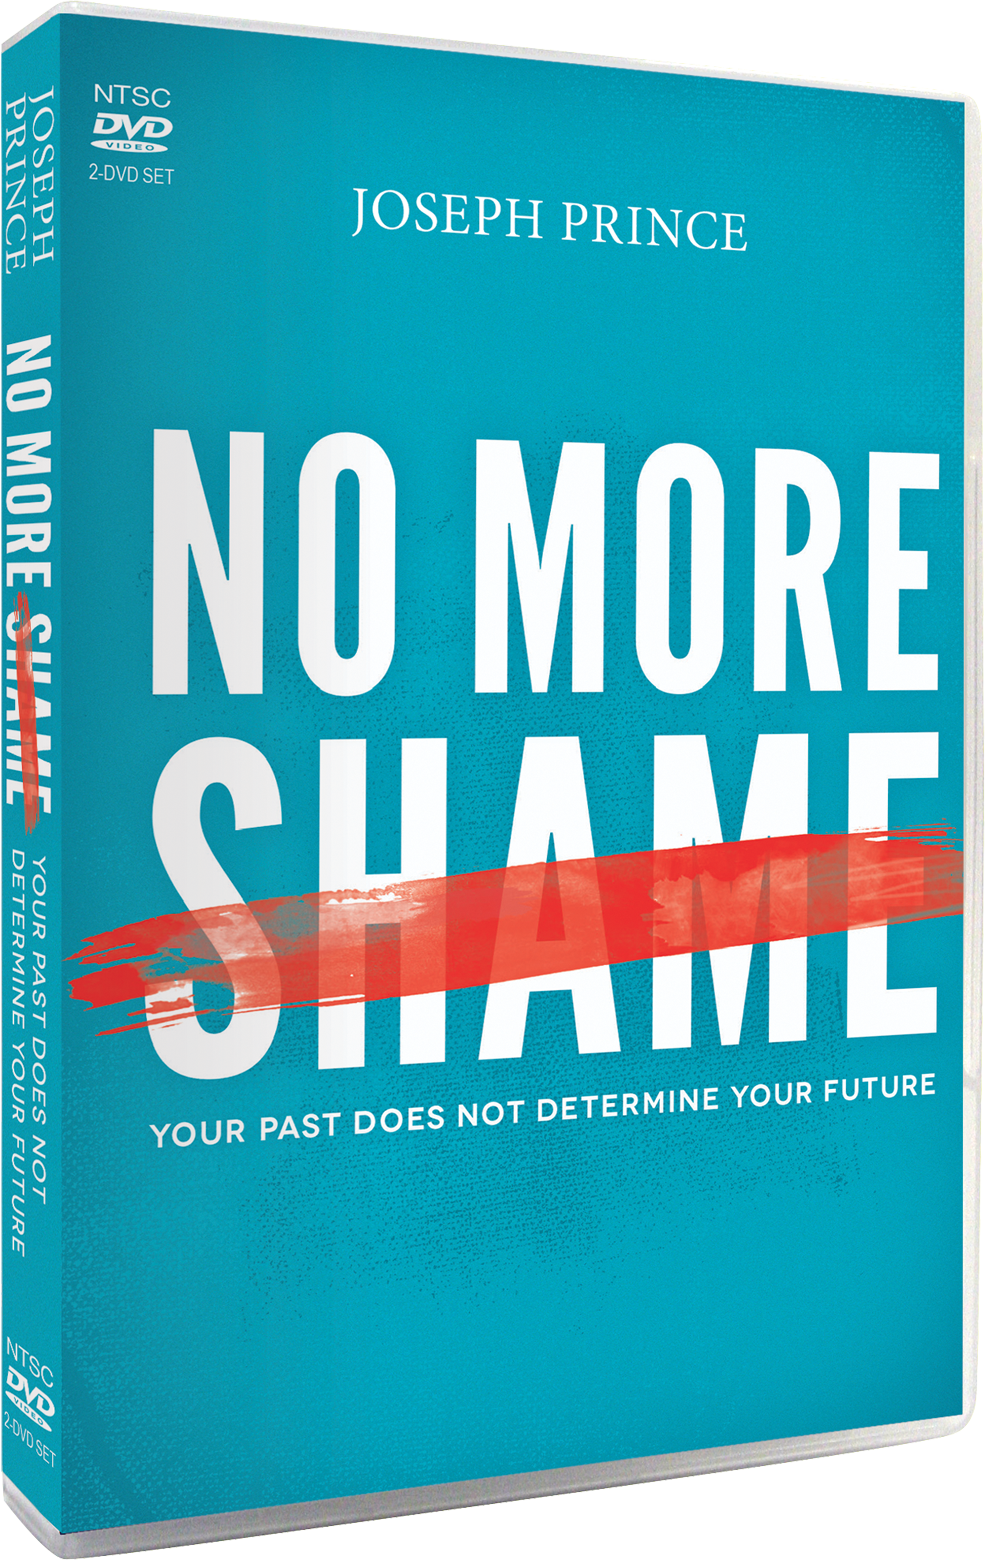 No More Shame—Your Past Does Not Determine Your Future (DVD Album)